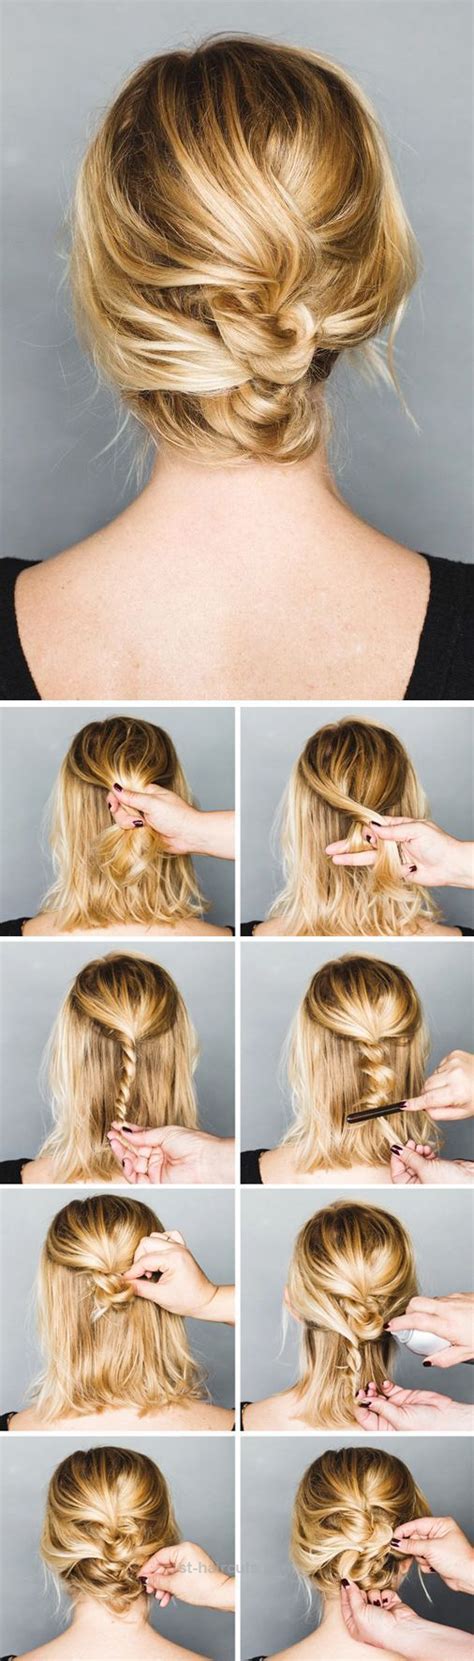 This How To Updos For Short Hair For Short Hair The Ultimate Guide To